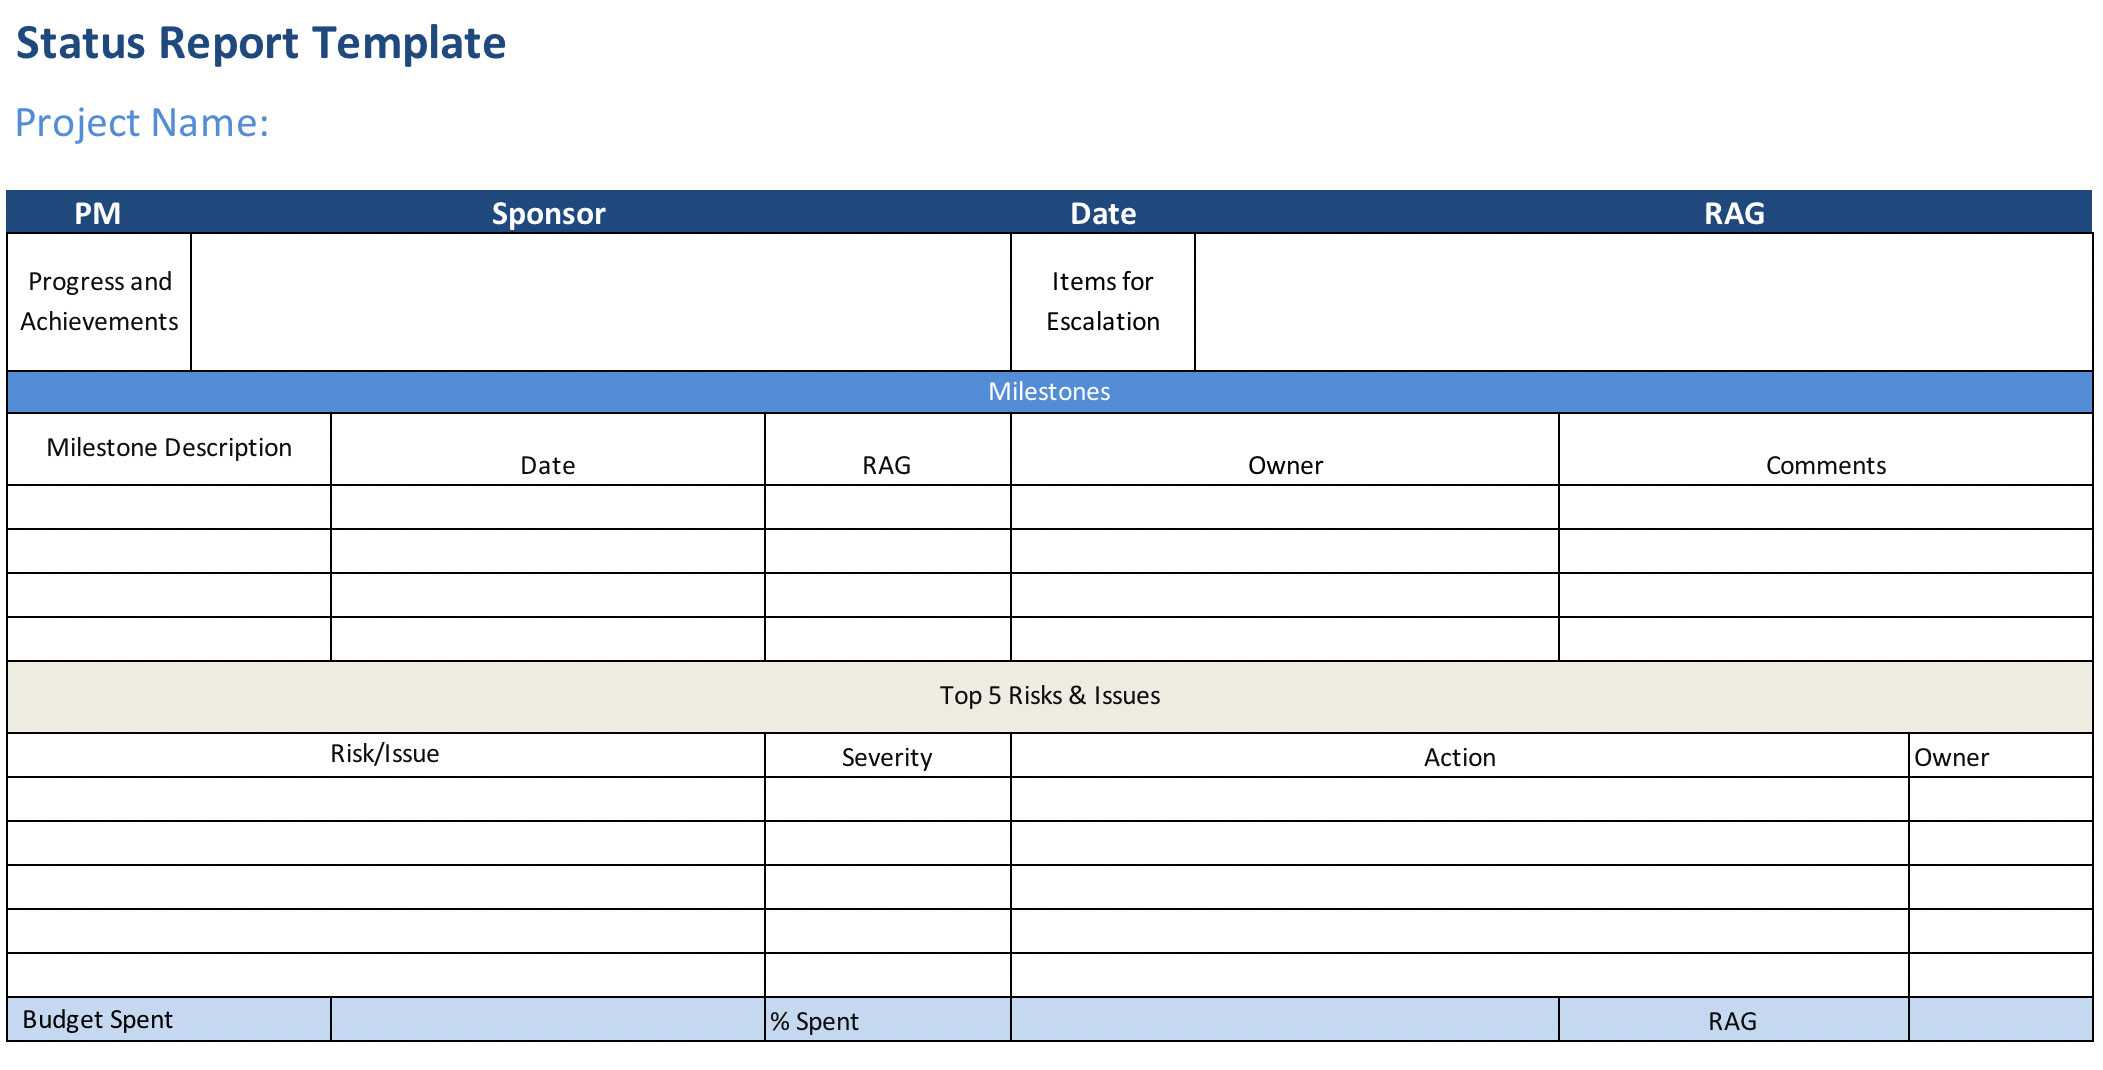 Project Status Report (Free Excel Template) - Projectmanager For Project Manager Status Report Template